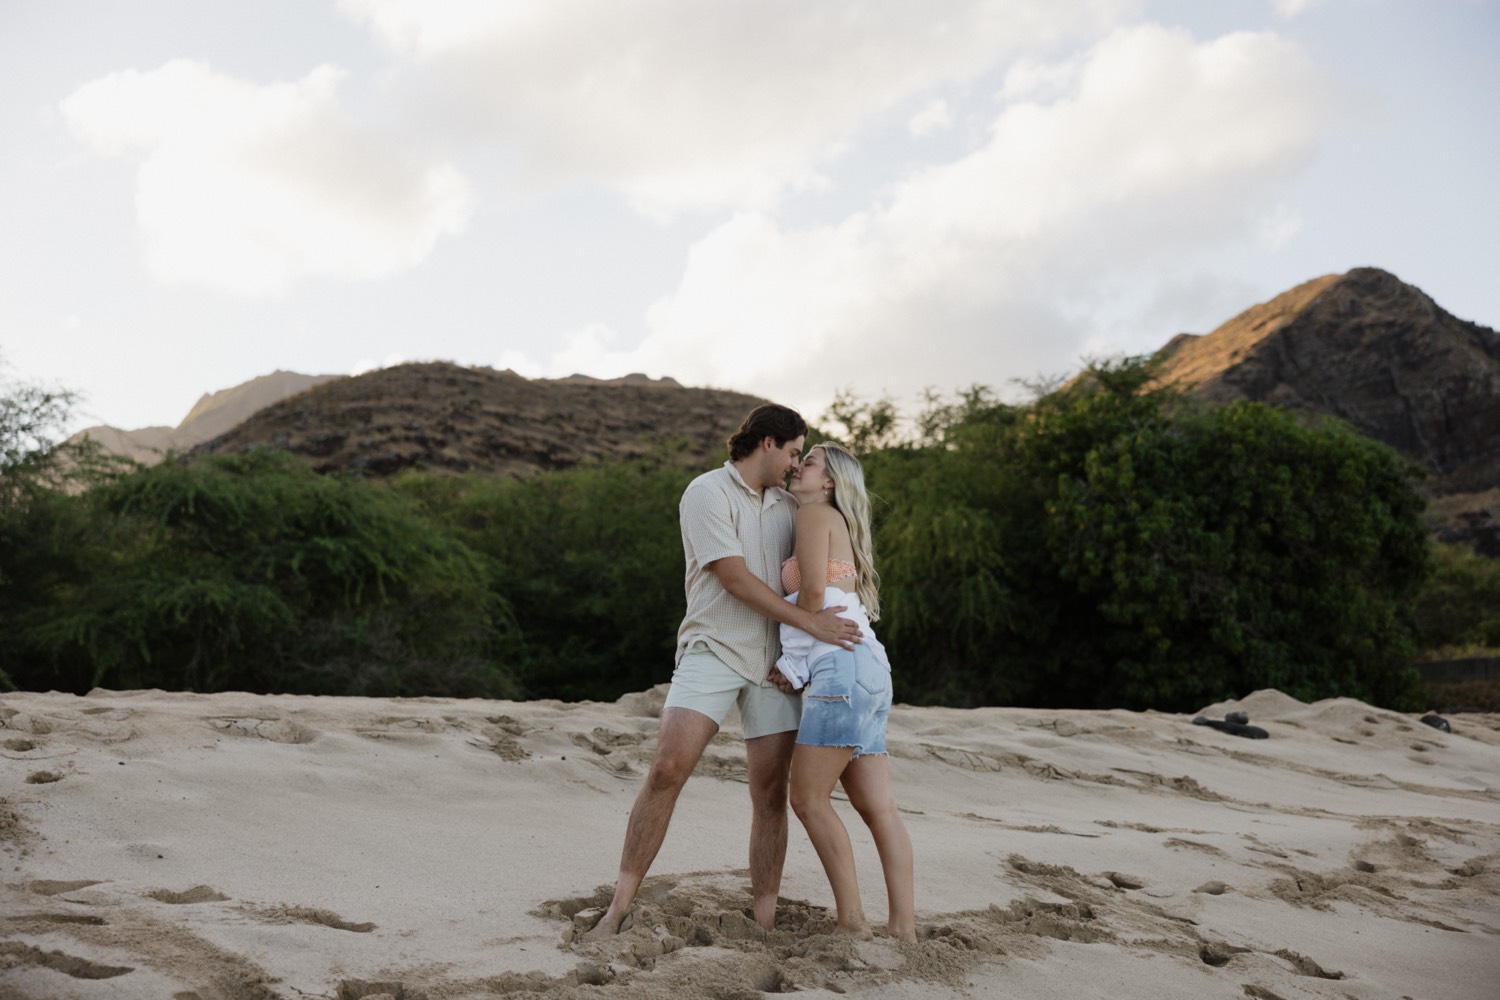 A man and woman stand on a beach on Oahu with mountains behind them, they're about to kiss one another during their engagement session taking place at sunrise